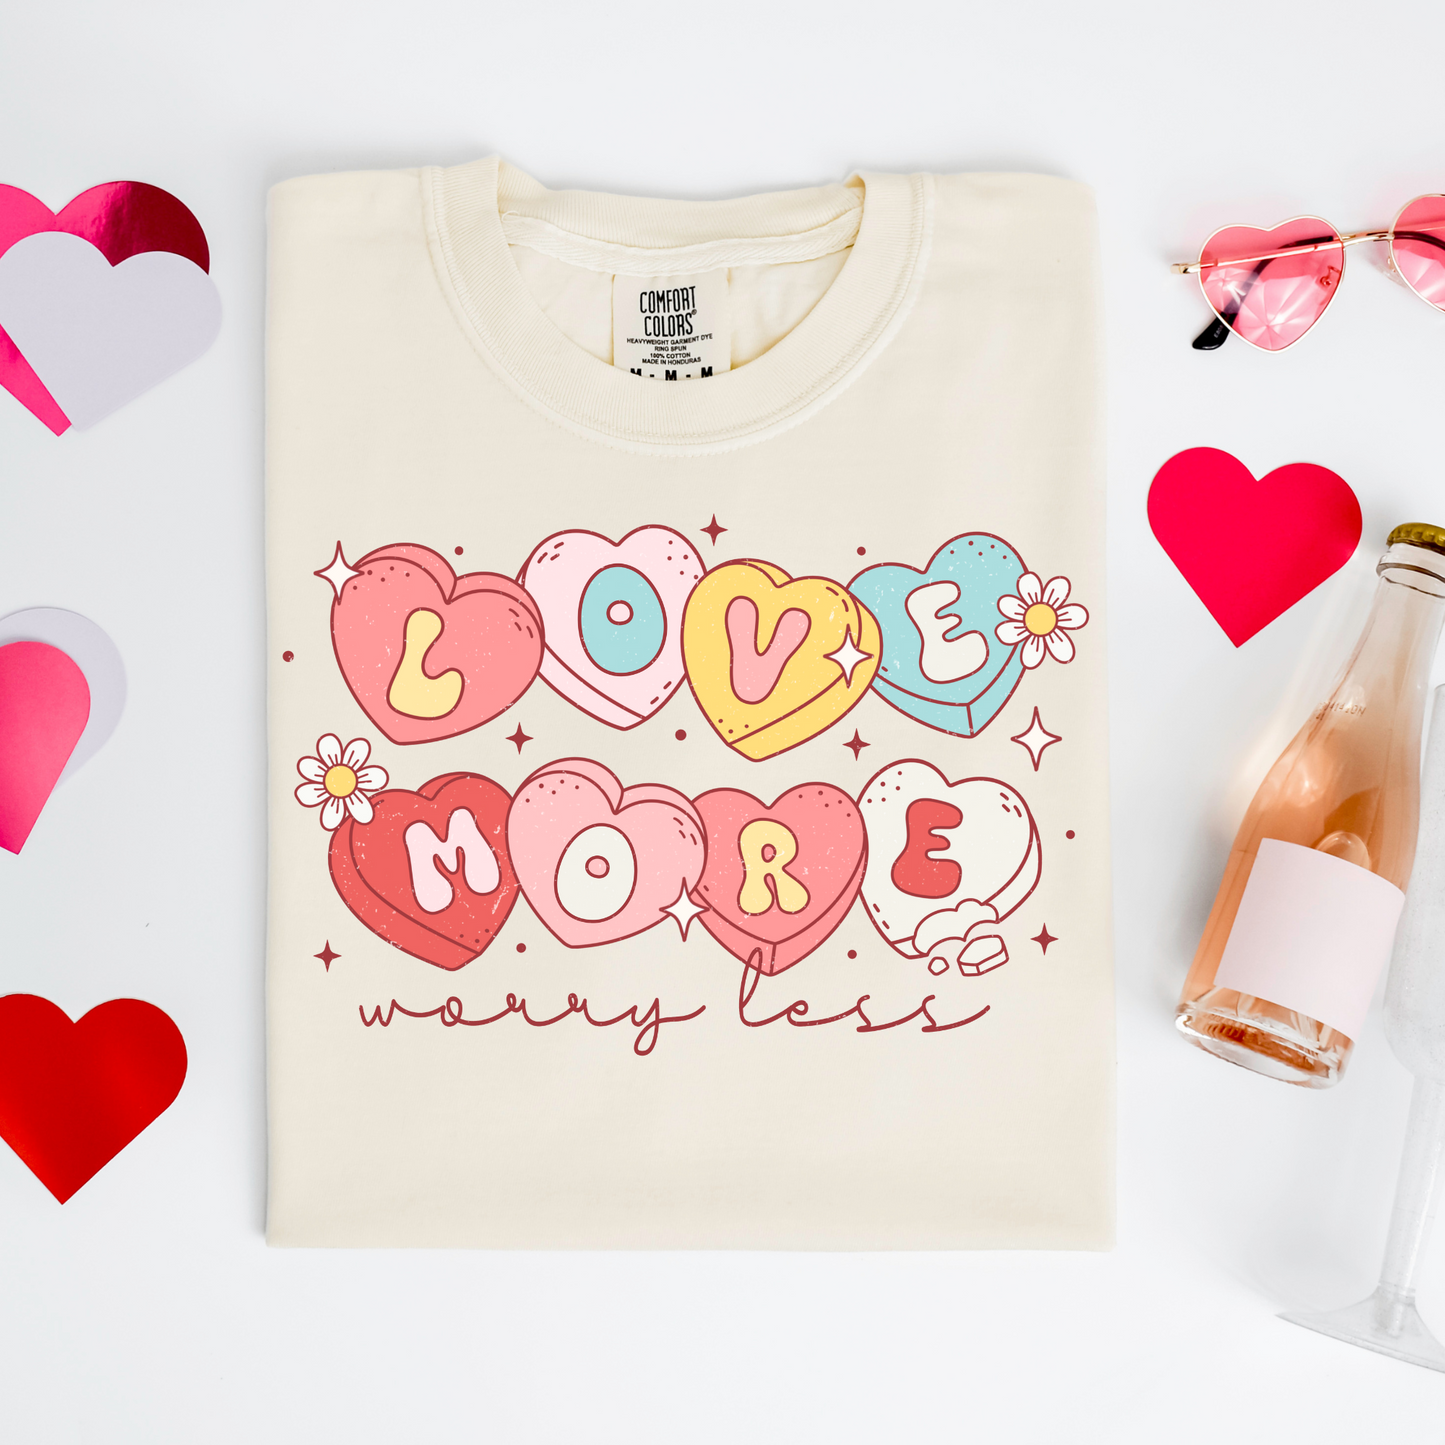 a t - shirt that says i love you more next to a bottle of wine